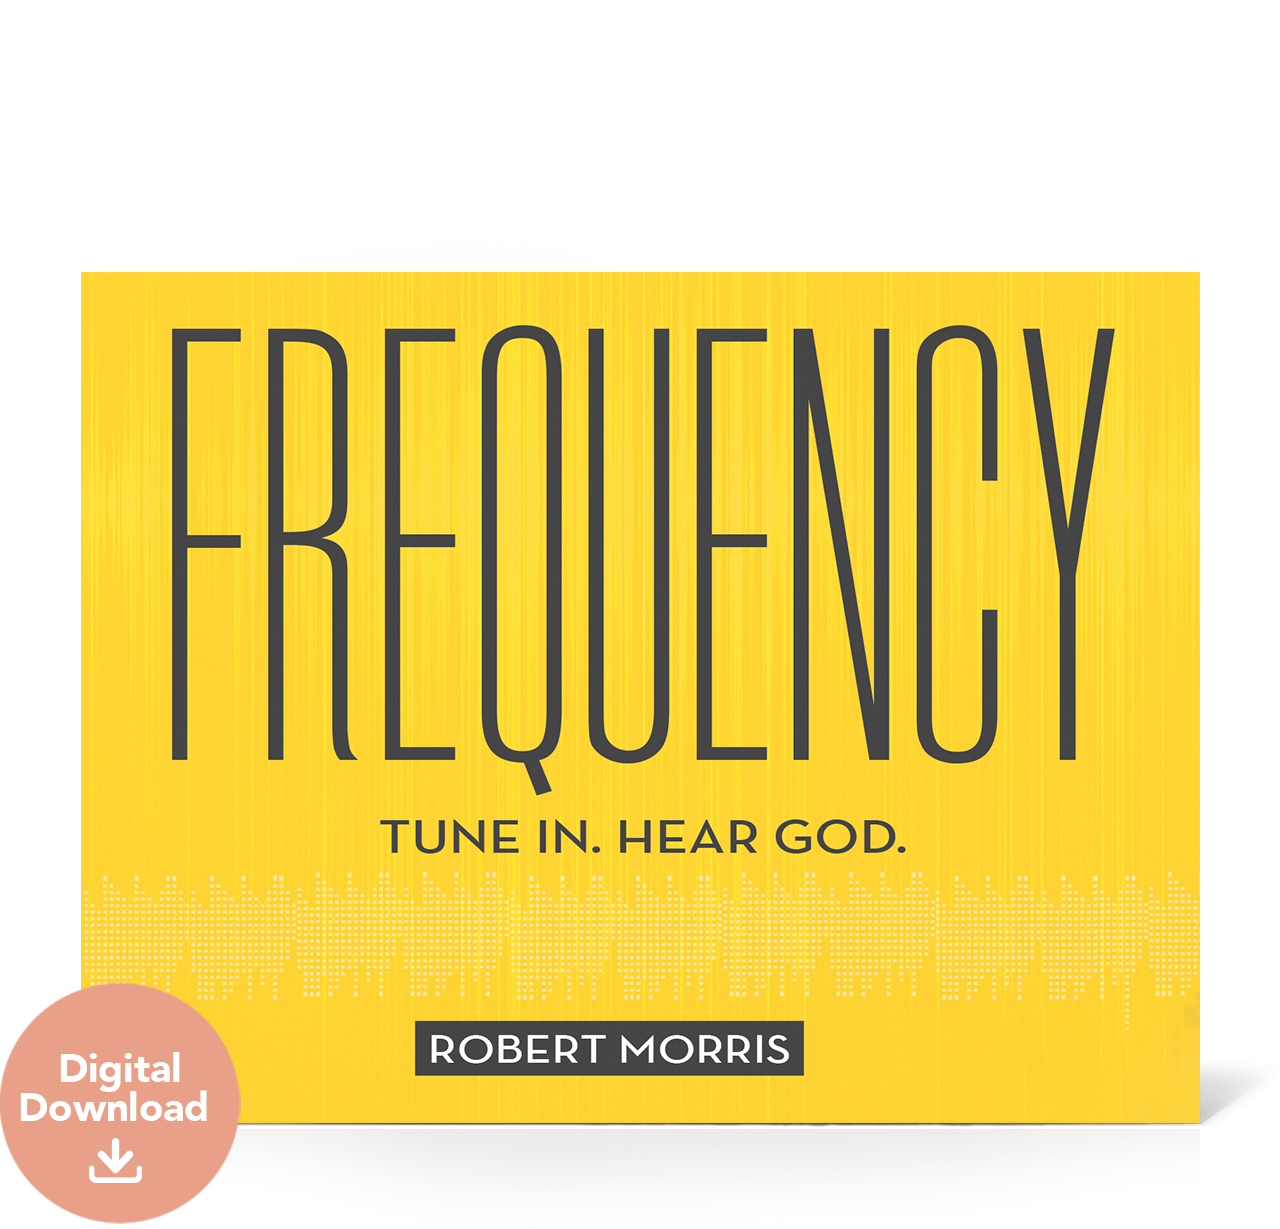 Frequency Special Offer Audio Digital Download